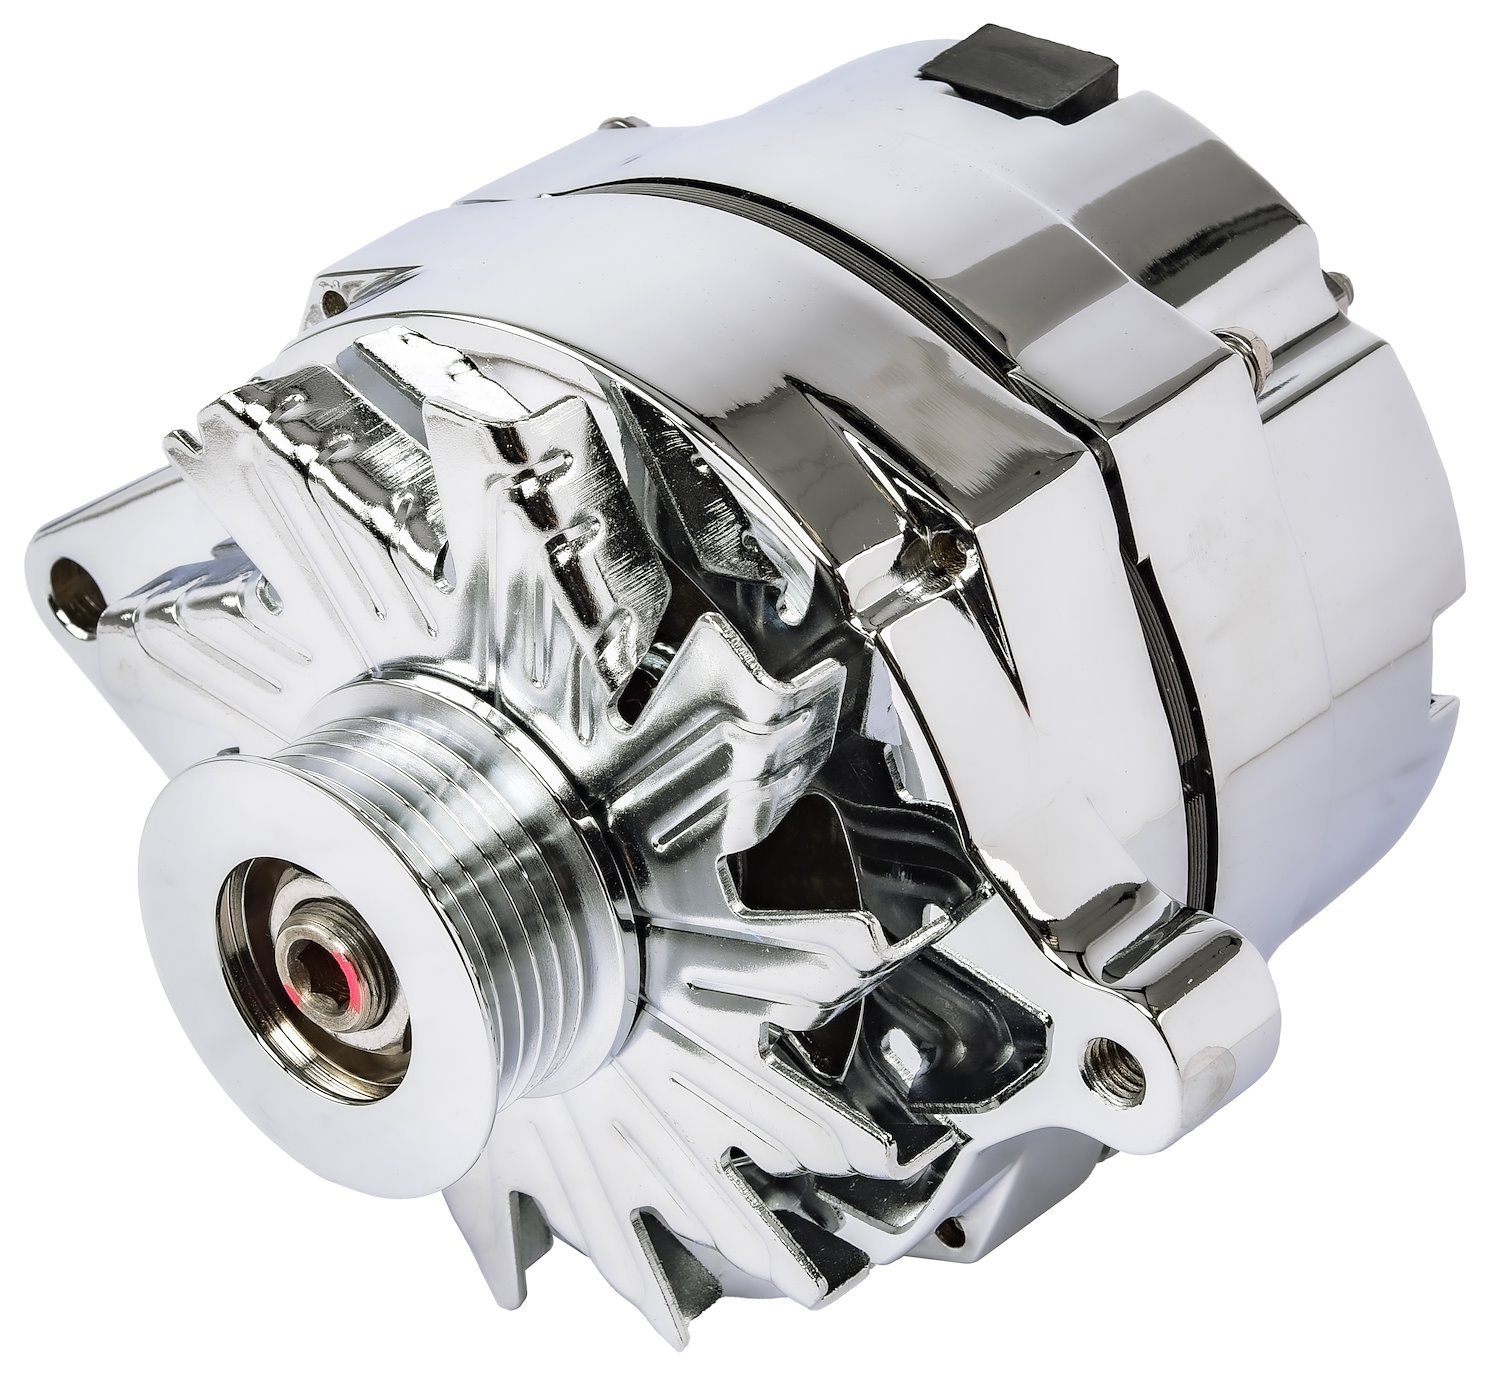 Ford 1-Wire Alternator, 140 amp Output with Serpentine Belt Pulley [Chrome Plated Finish]